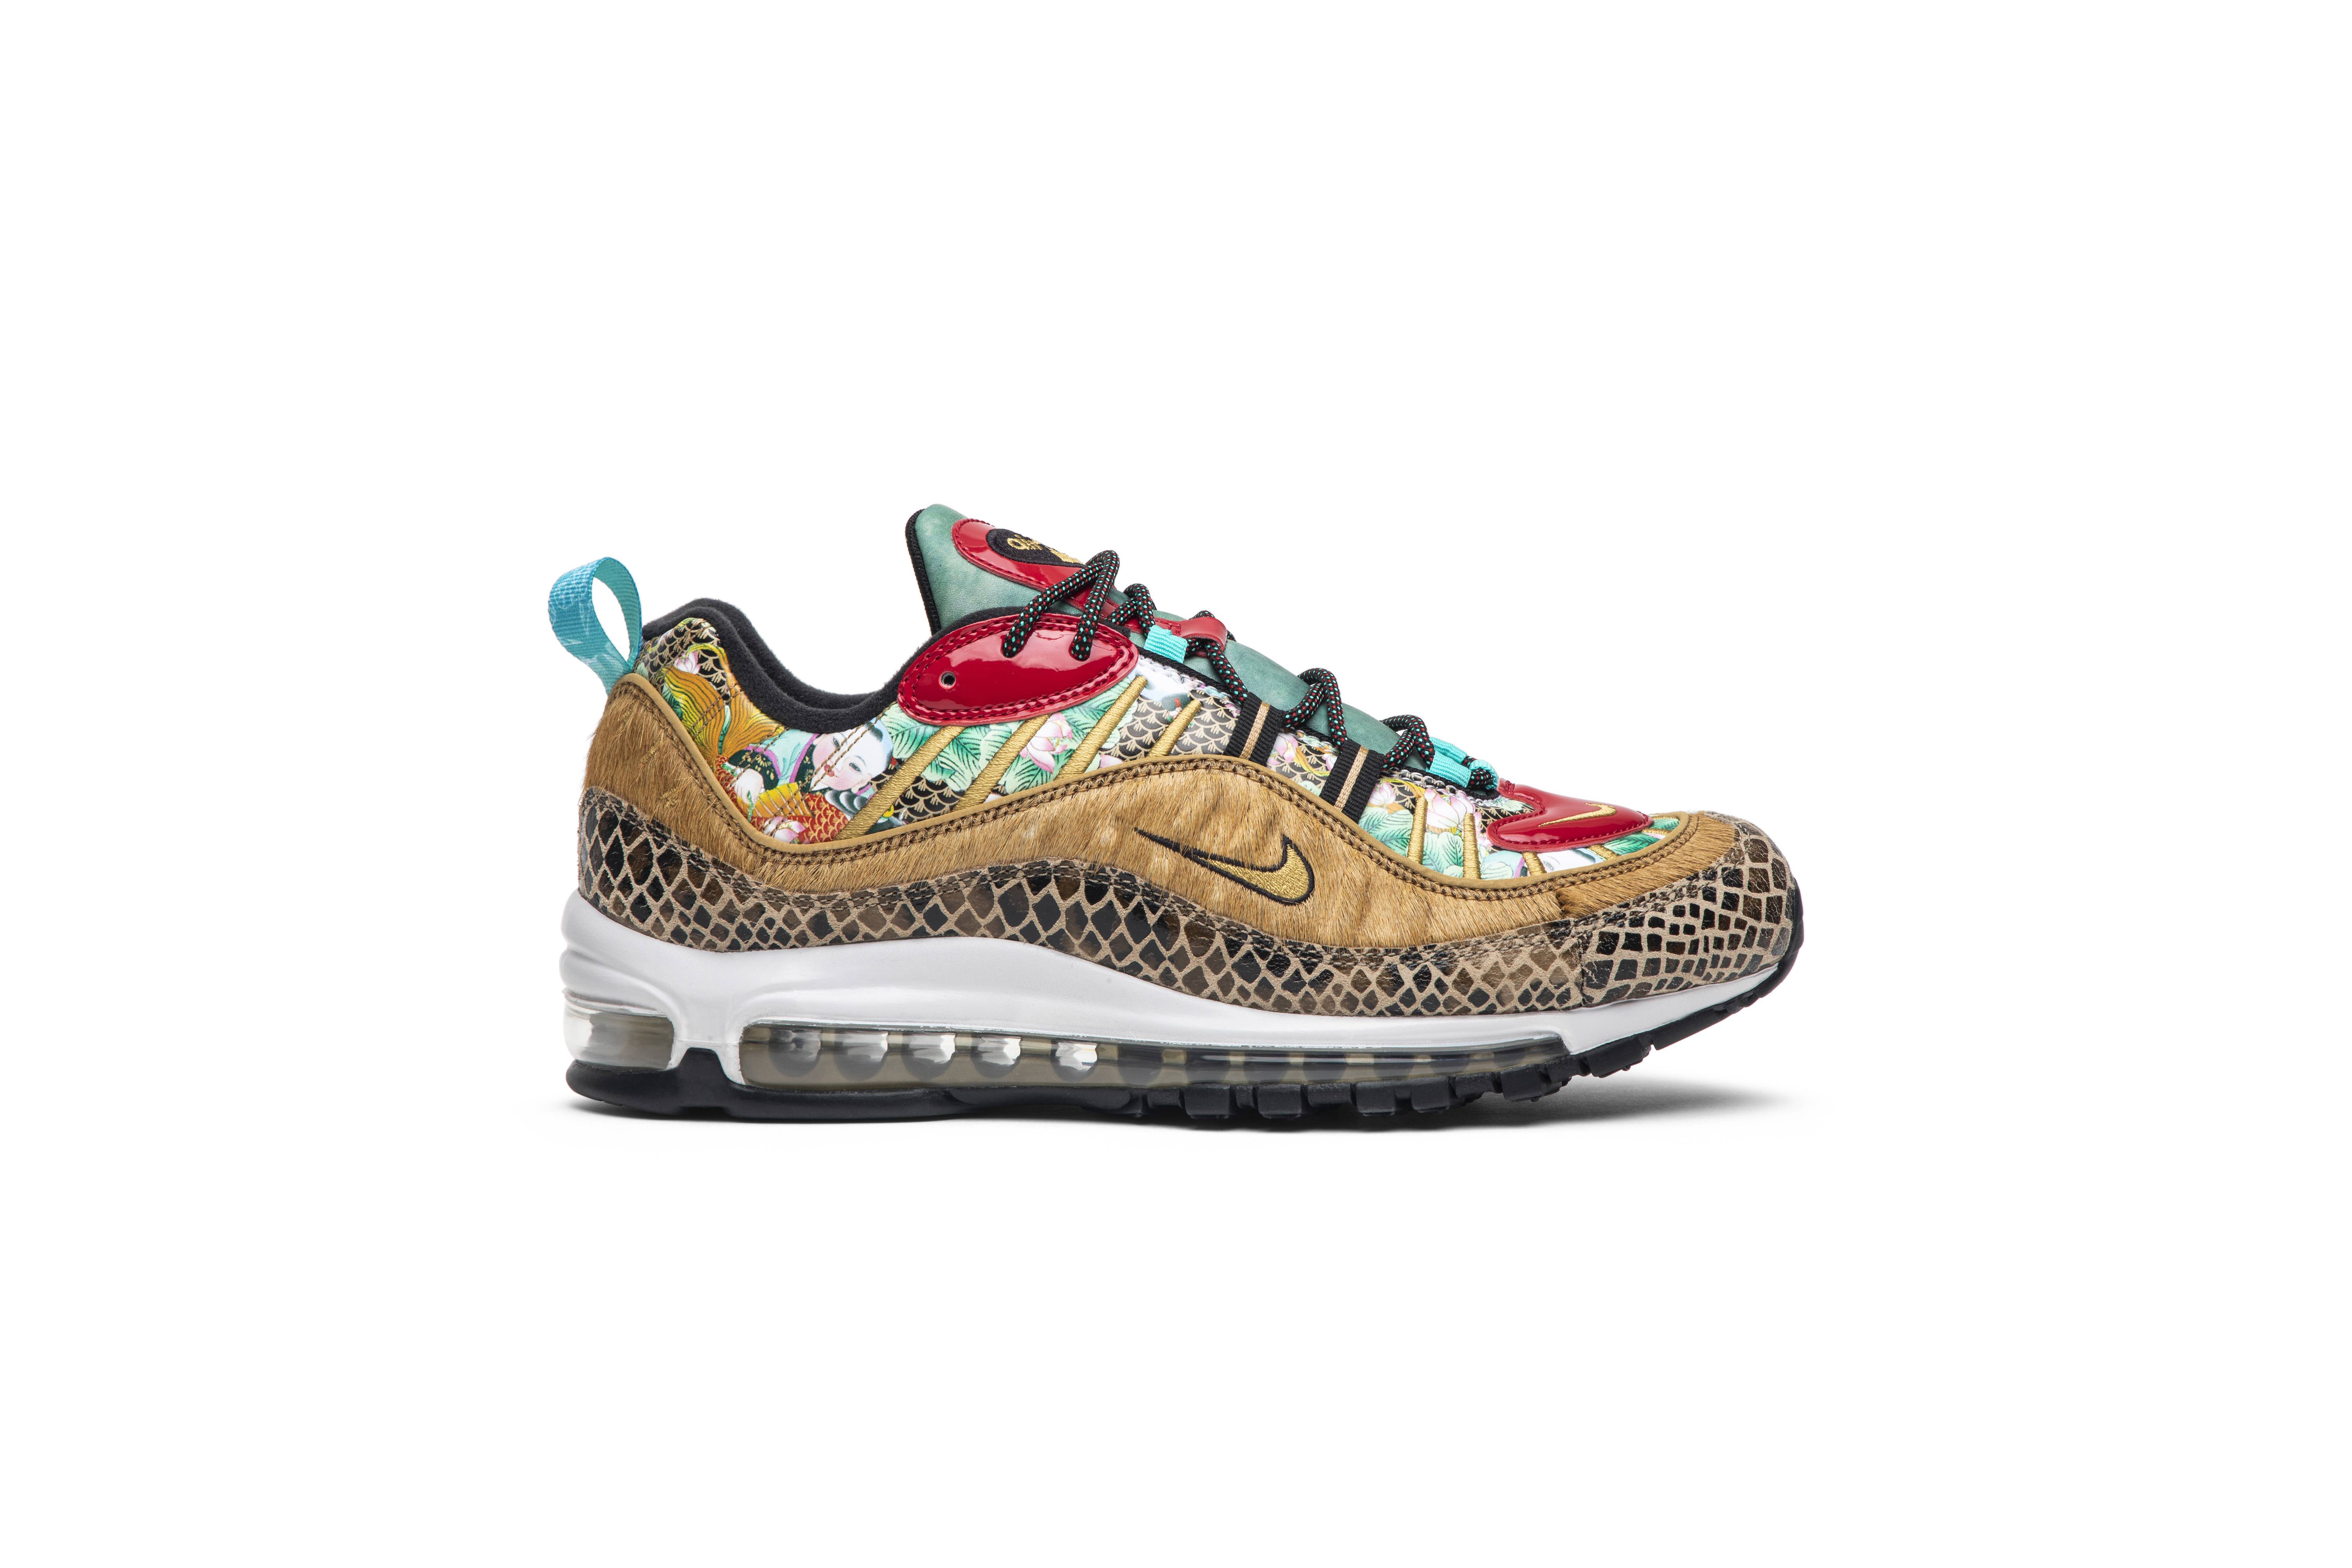 chinese new year air max 98 release date